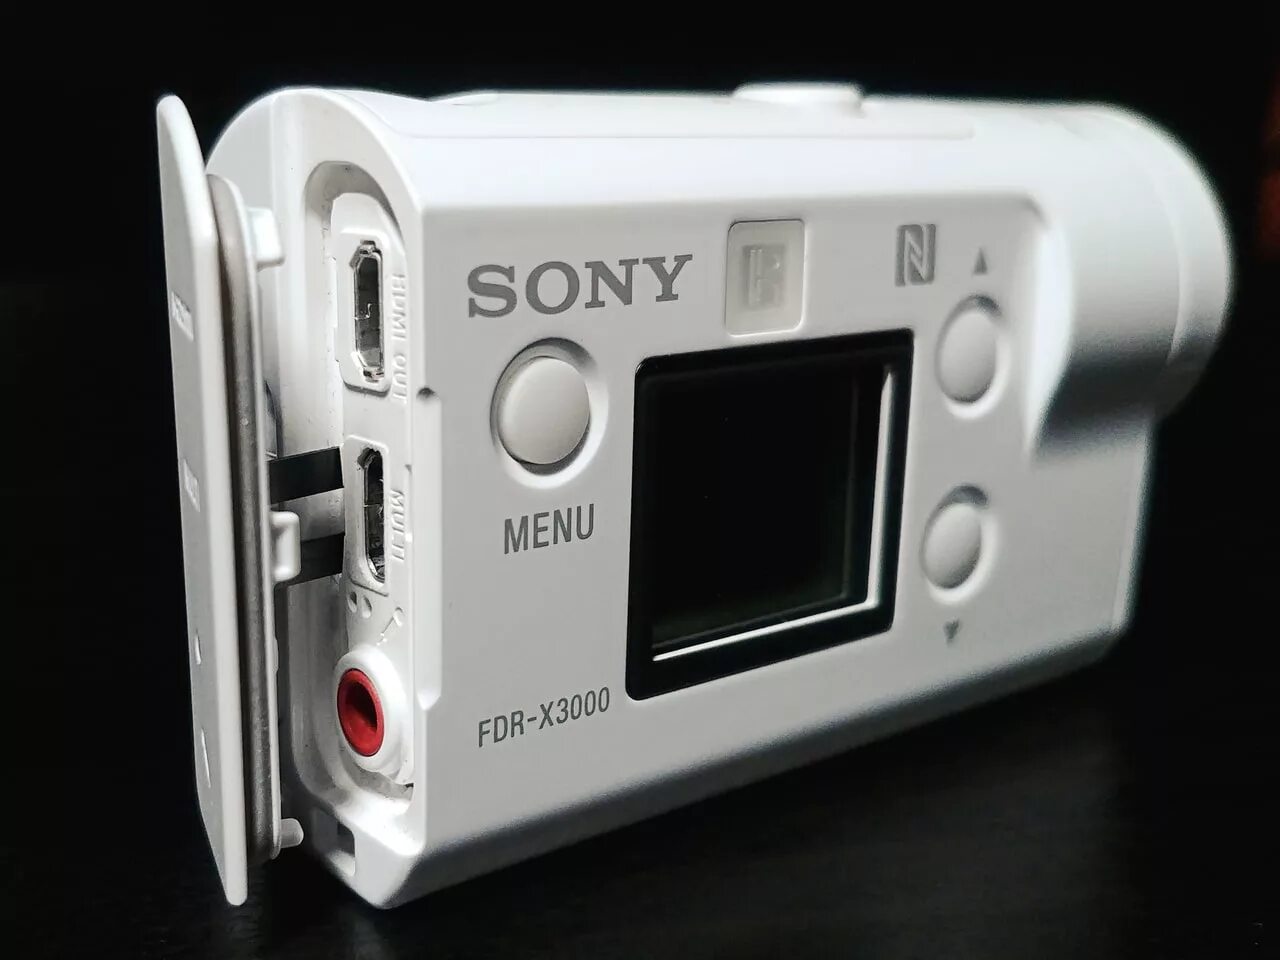 Sony FDR-x3000. Камера сони FDR-X 3000. Экшн камера Sony FDR-x3000r.